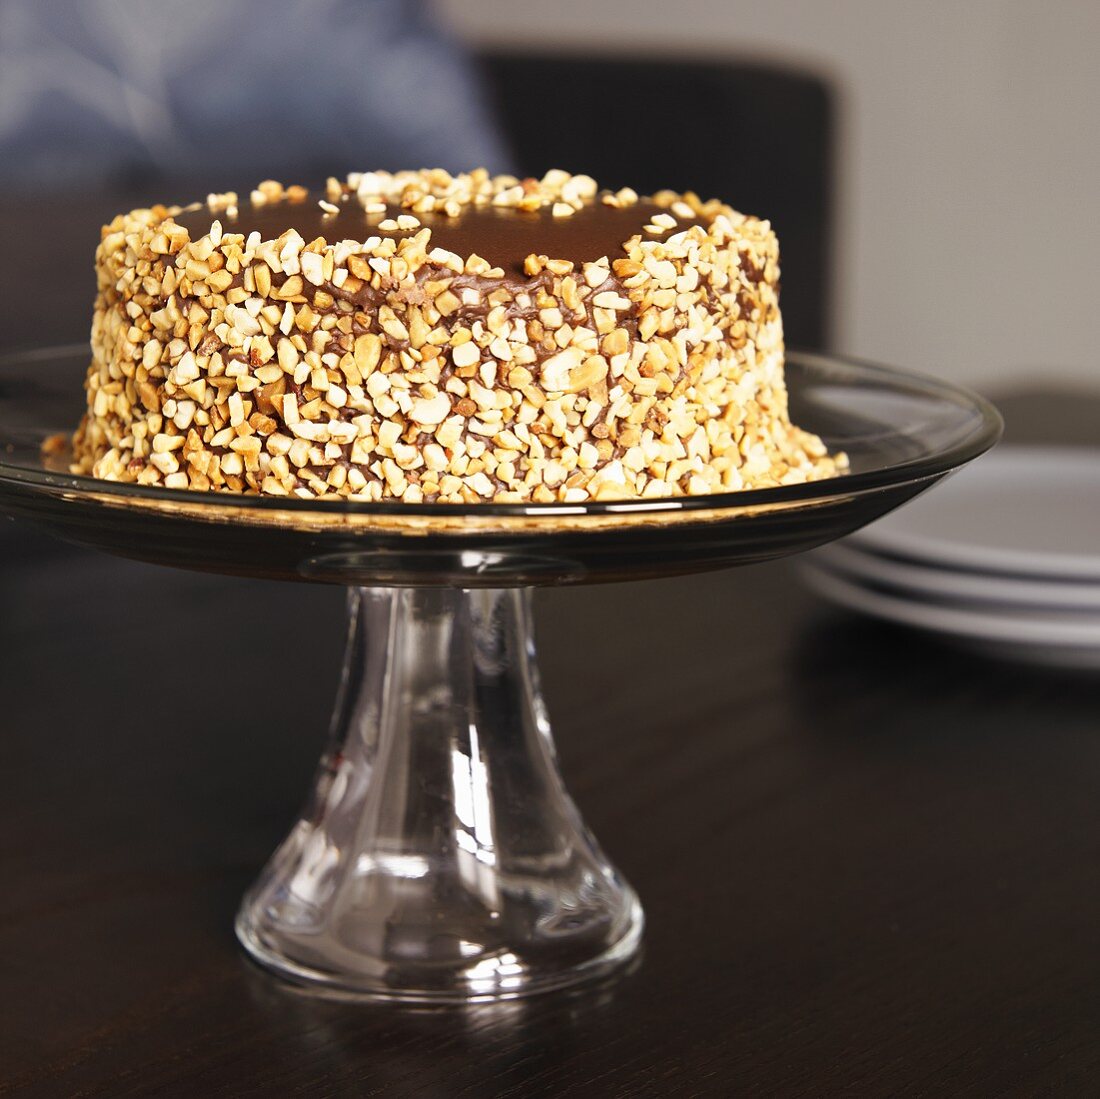 Chocolate Peanut Butter Cake with Crushed Peanuts on the Side